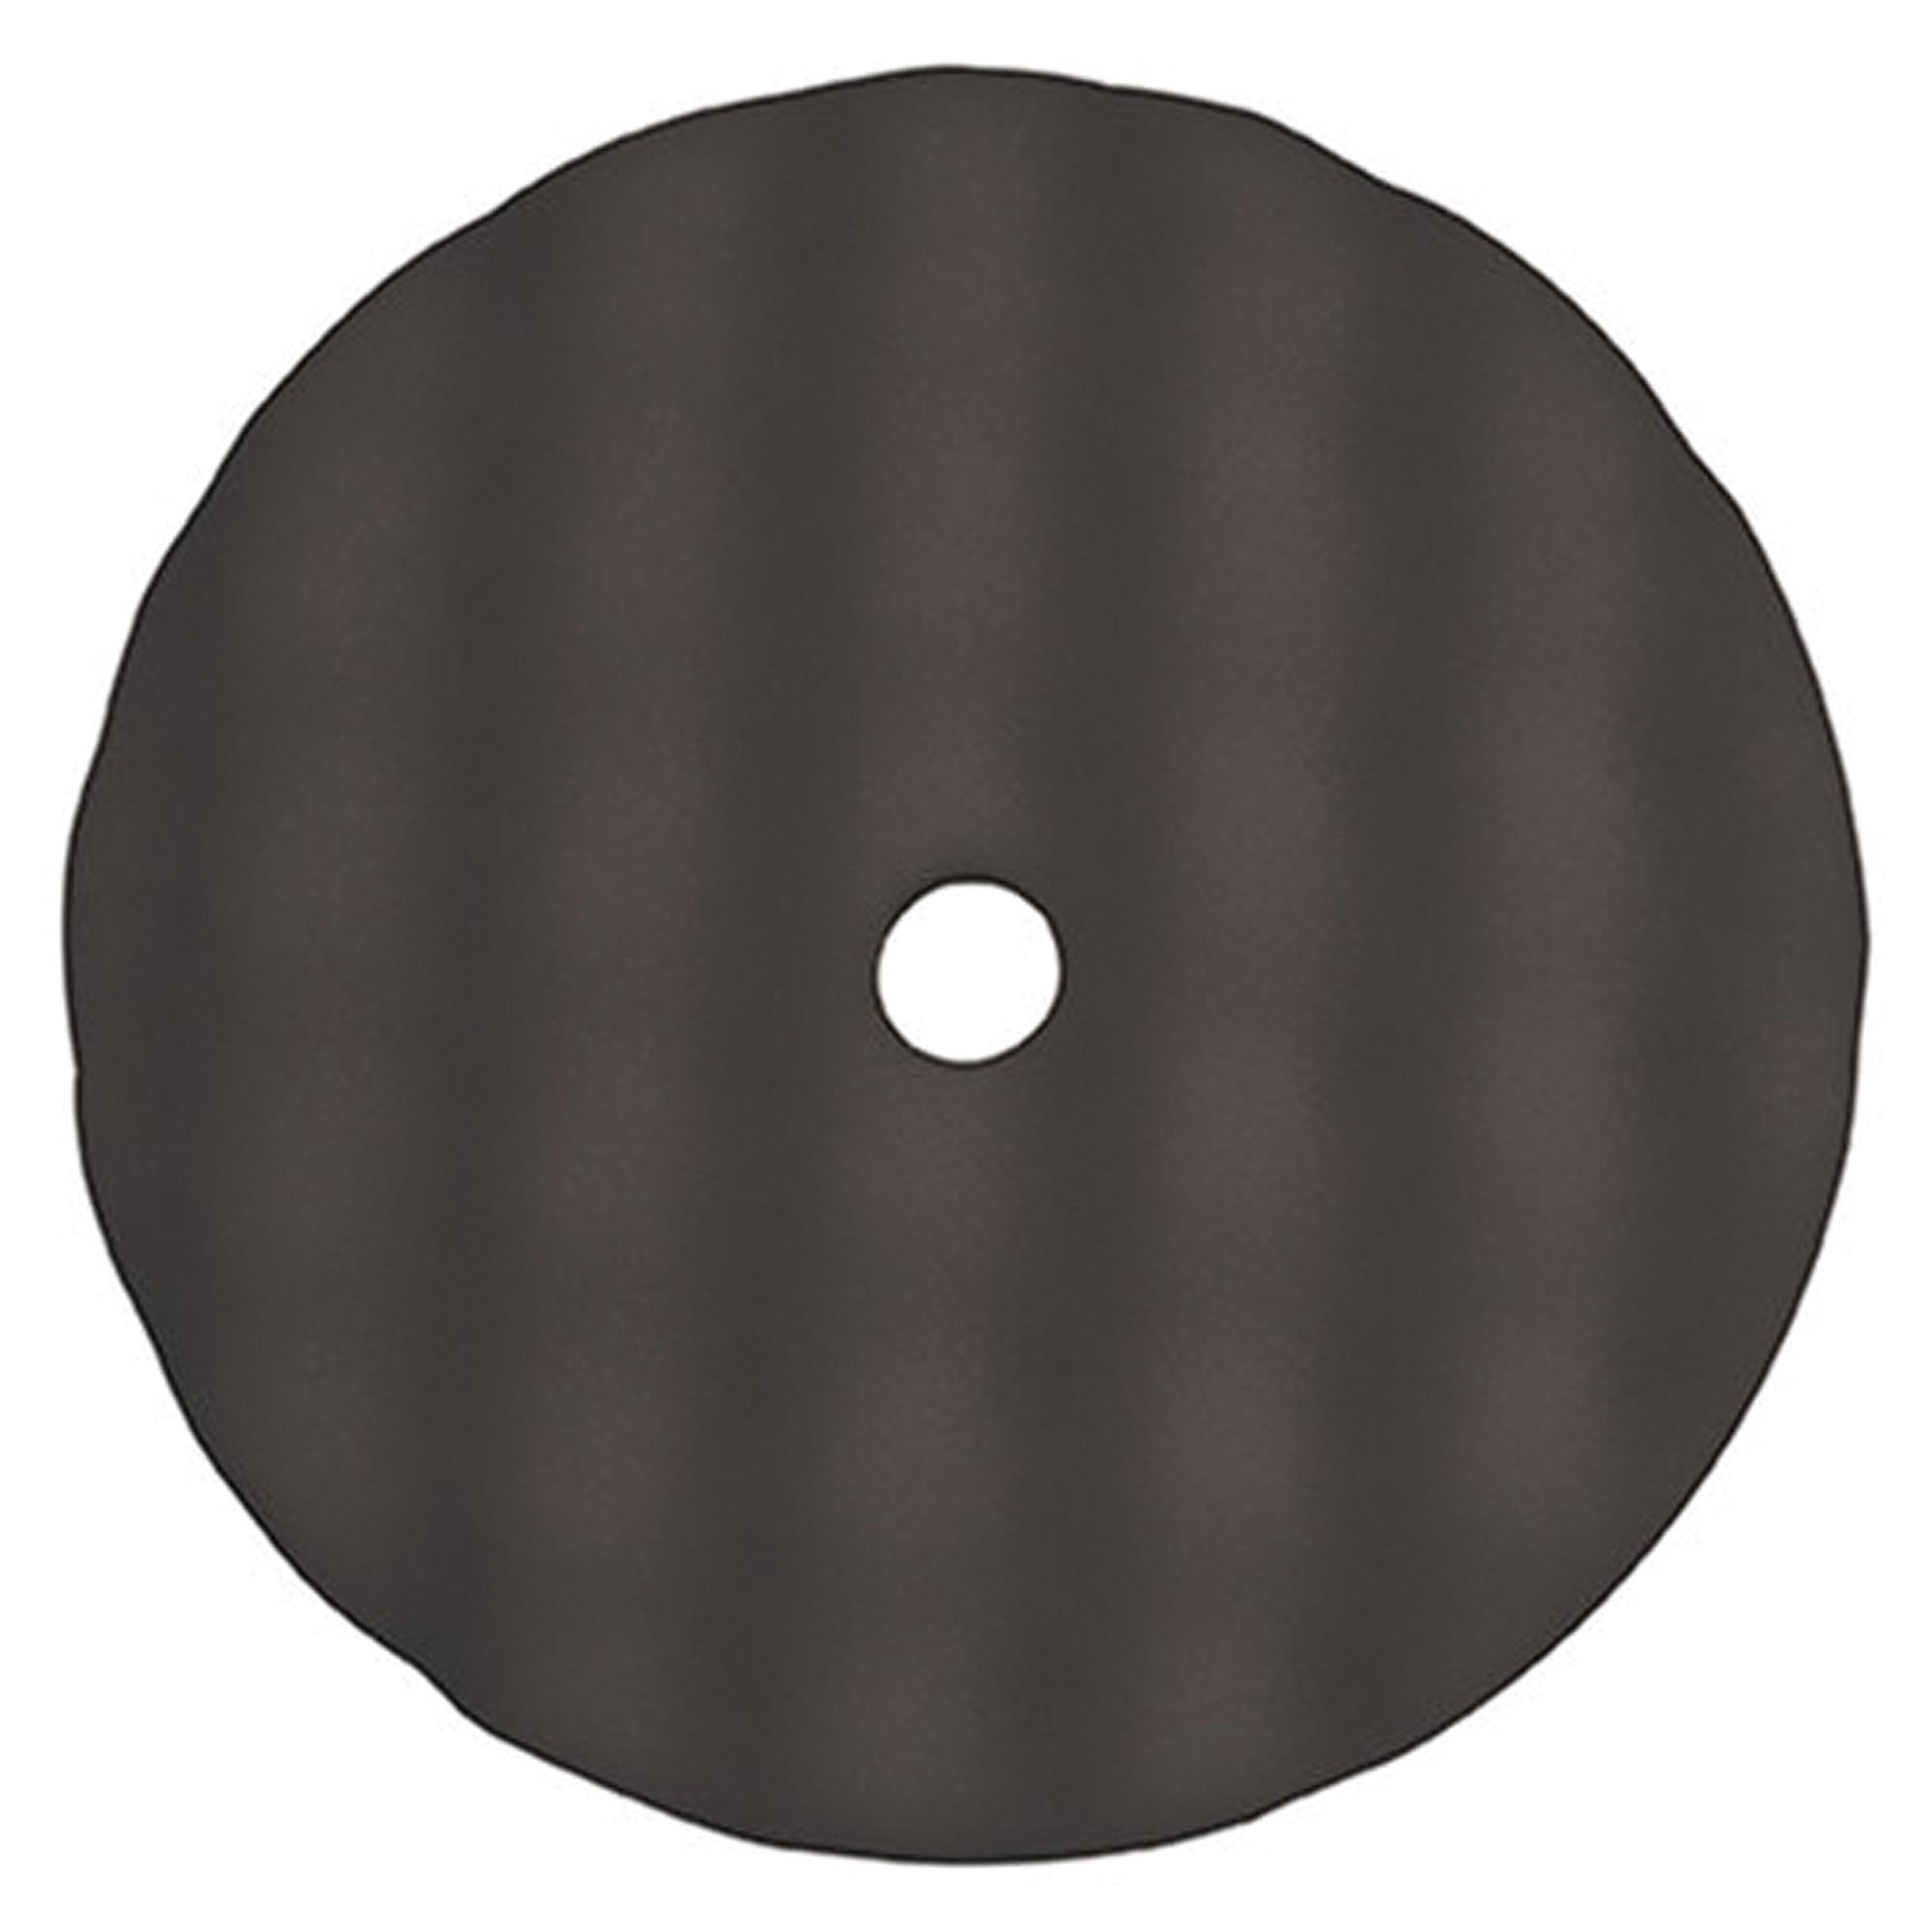 Wizards 11312 "The Finisher" Foam Buffing Pad - 8"